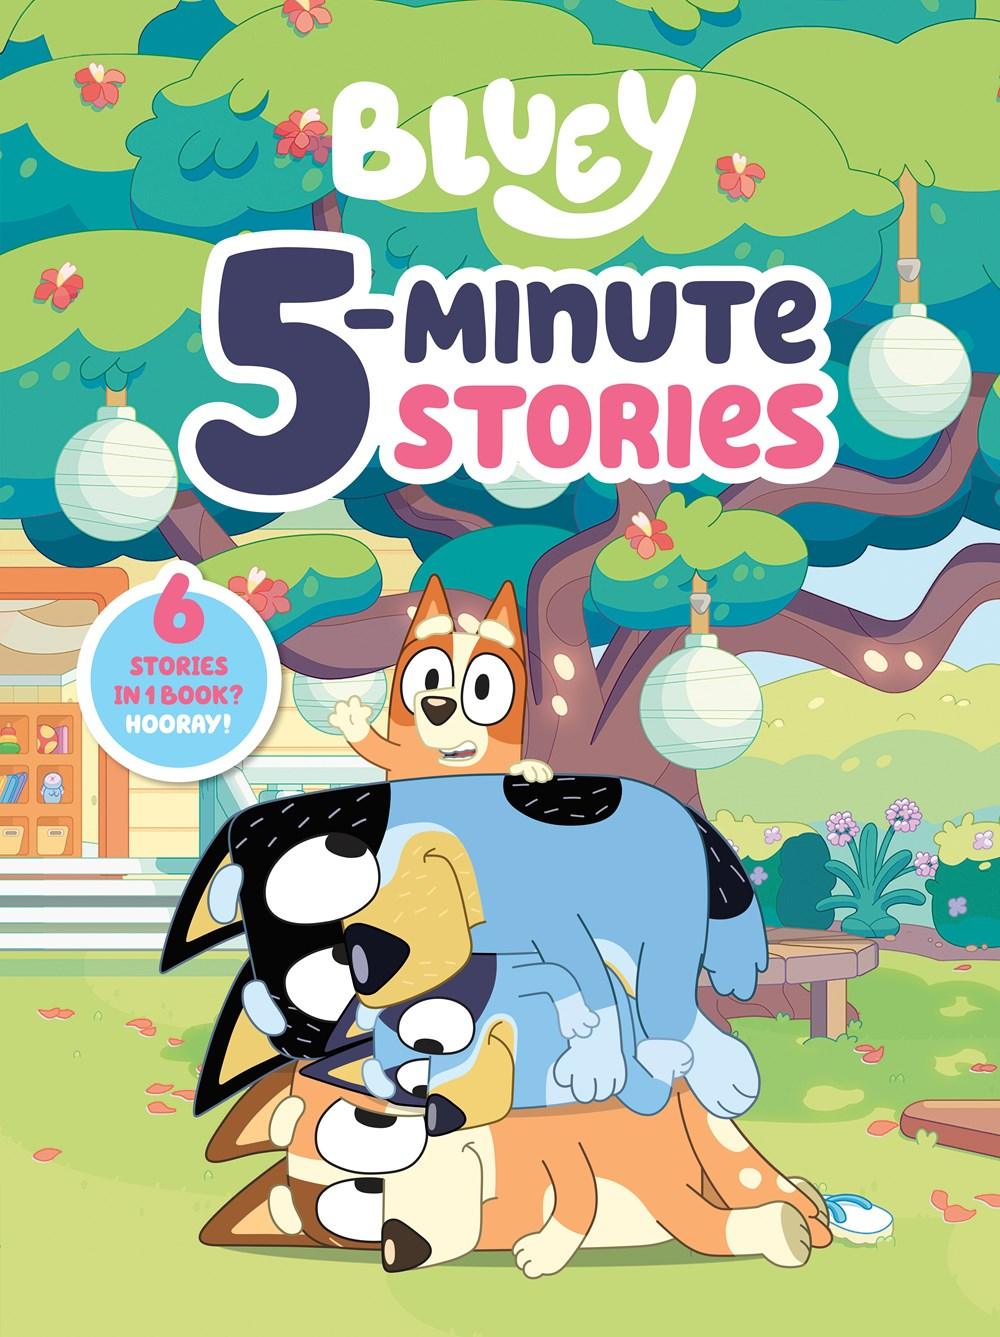 Bluey 5-Minute Stories : 6 Stories in 1 Book? Hooray! - Why and Whale